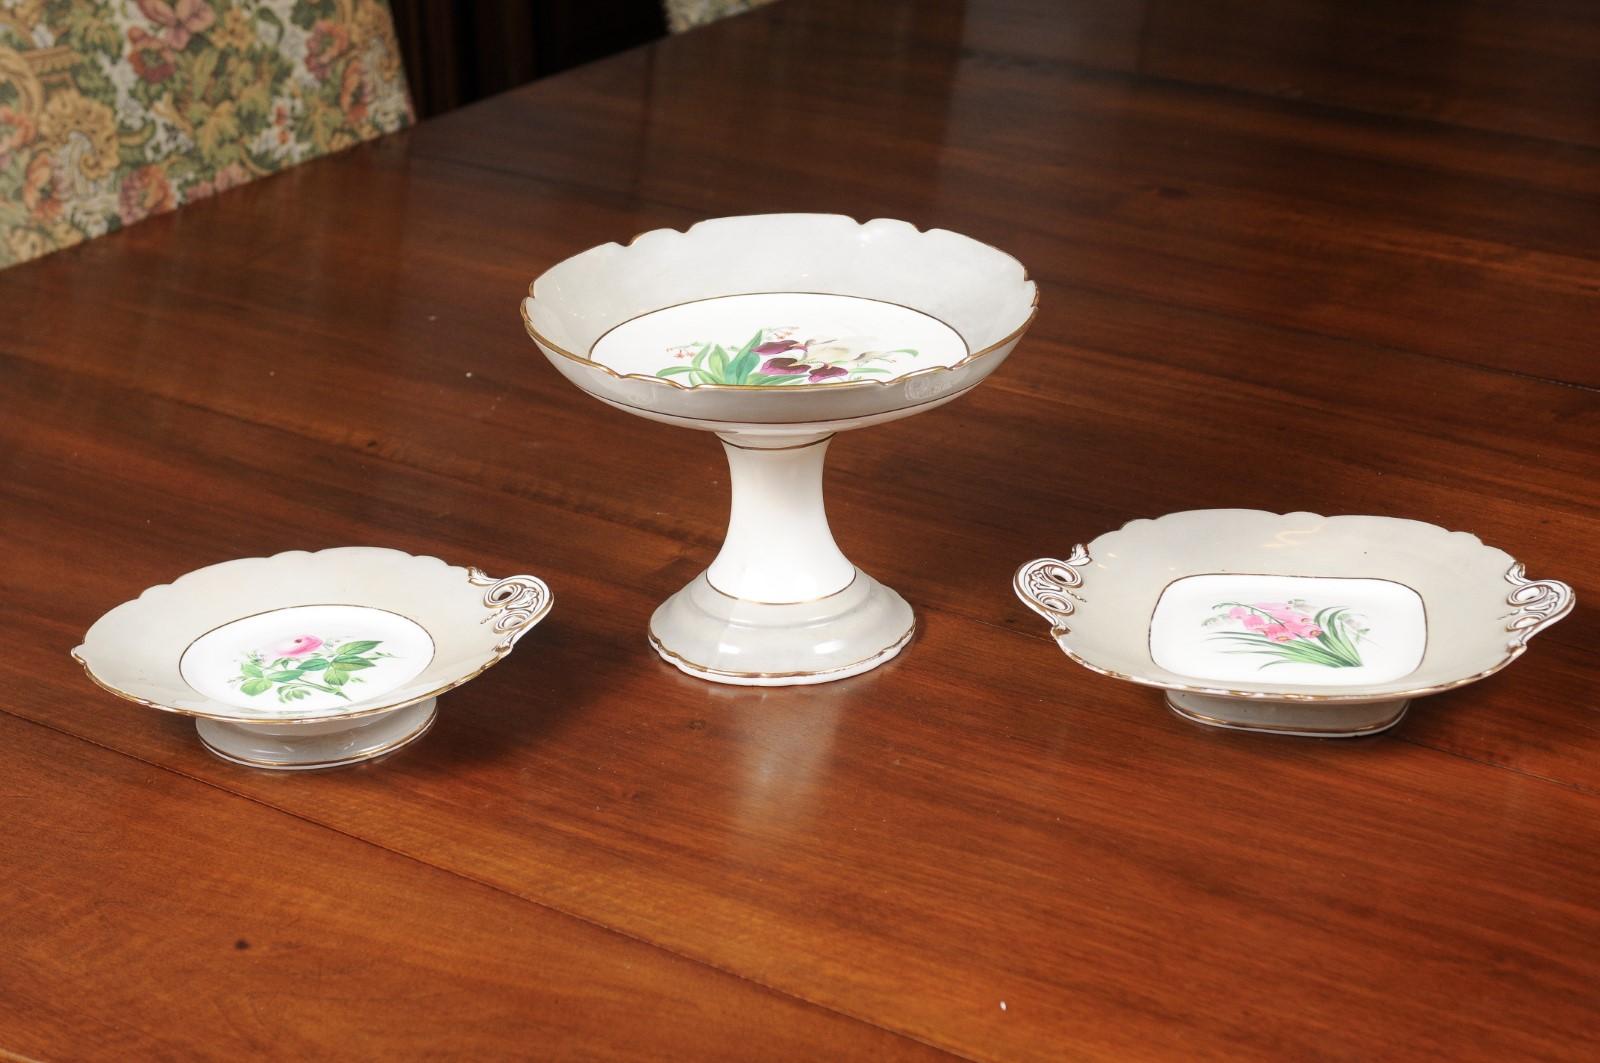 English porcelain plates and compote from the 19th century, with floral décor, priced and sold individually. Born in England during the 19th century, each of these serving dishes features a pink and green floral décor standing out beautifully on a